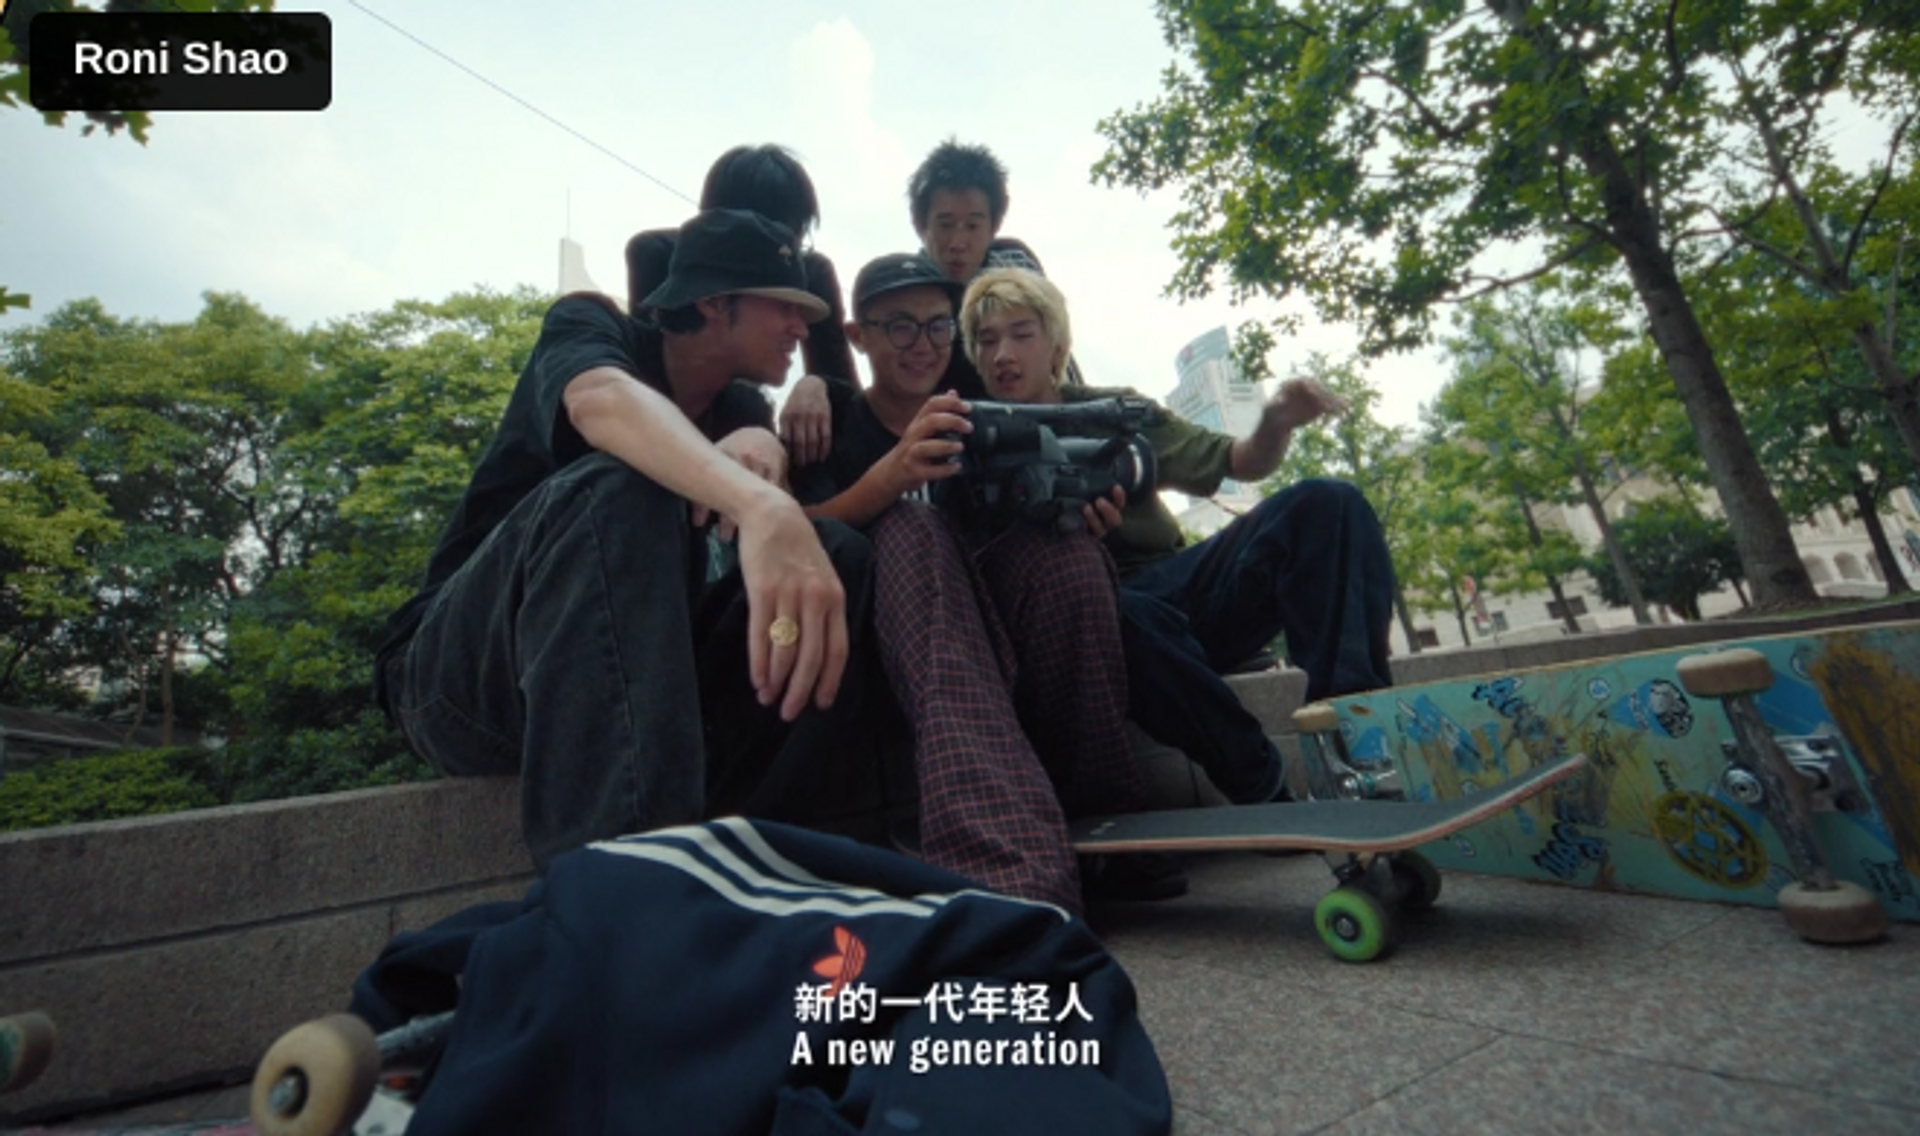 Adidas documentary captures skate culture in China